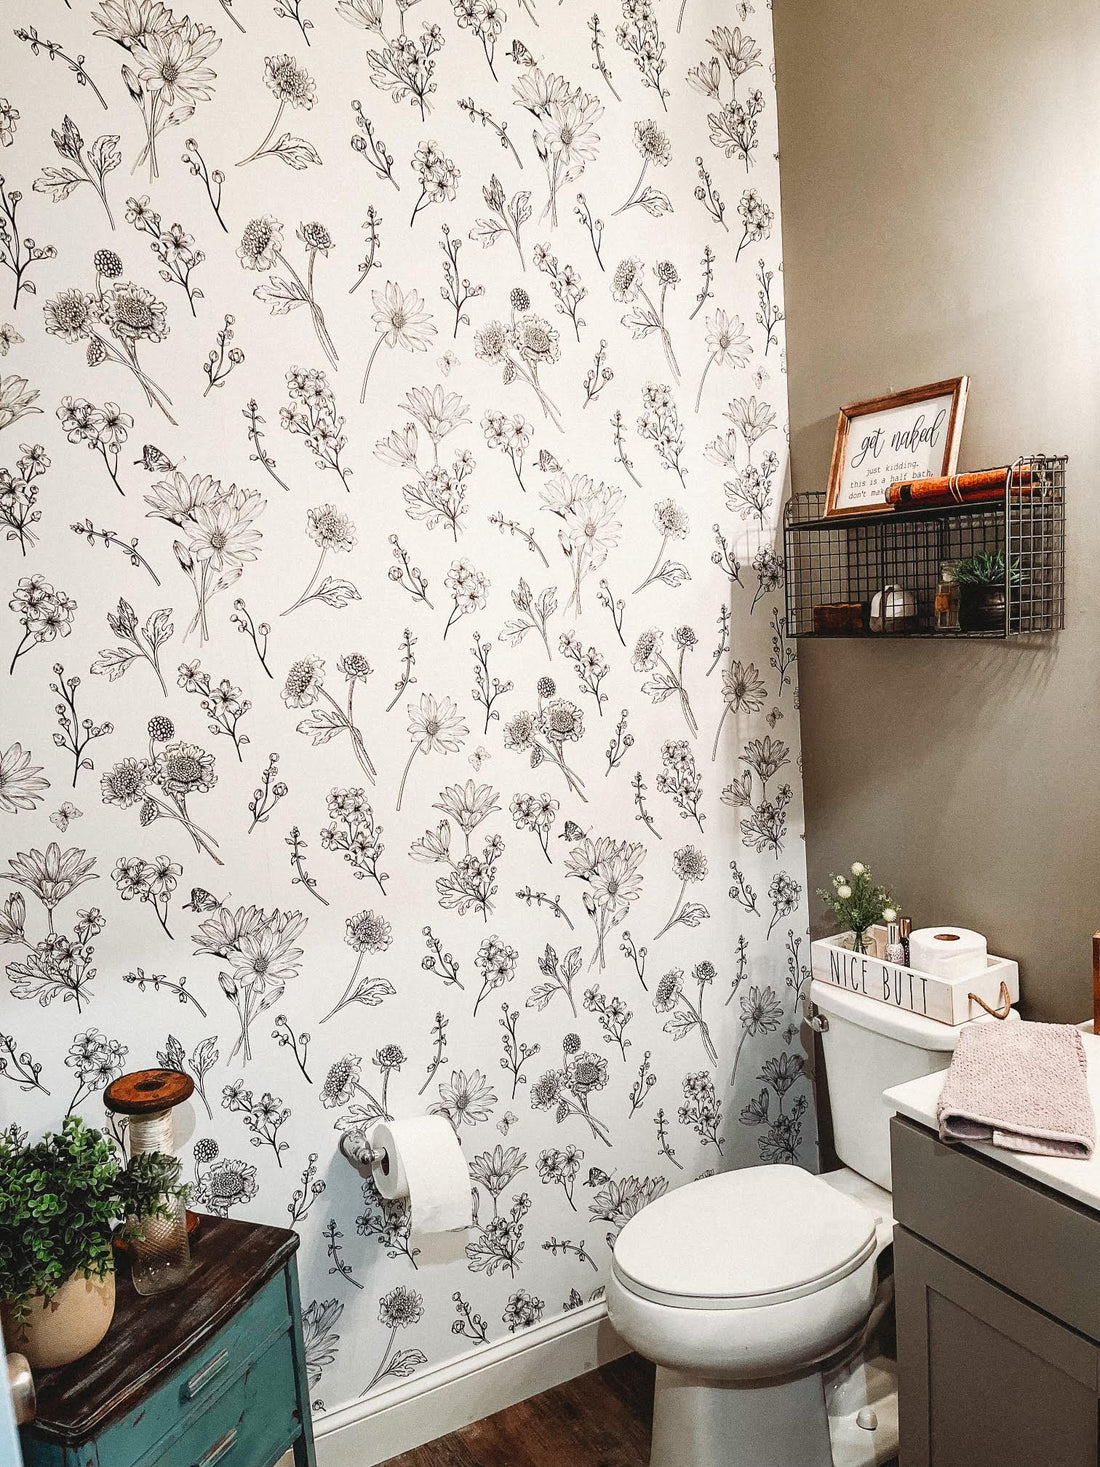 4 Reasons Why You Should NOT Use Traditional Wallpaper